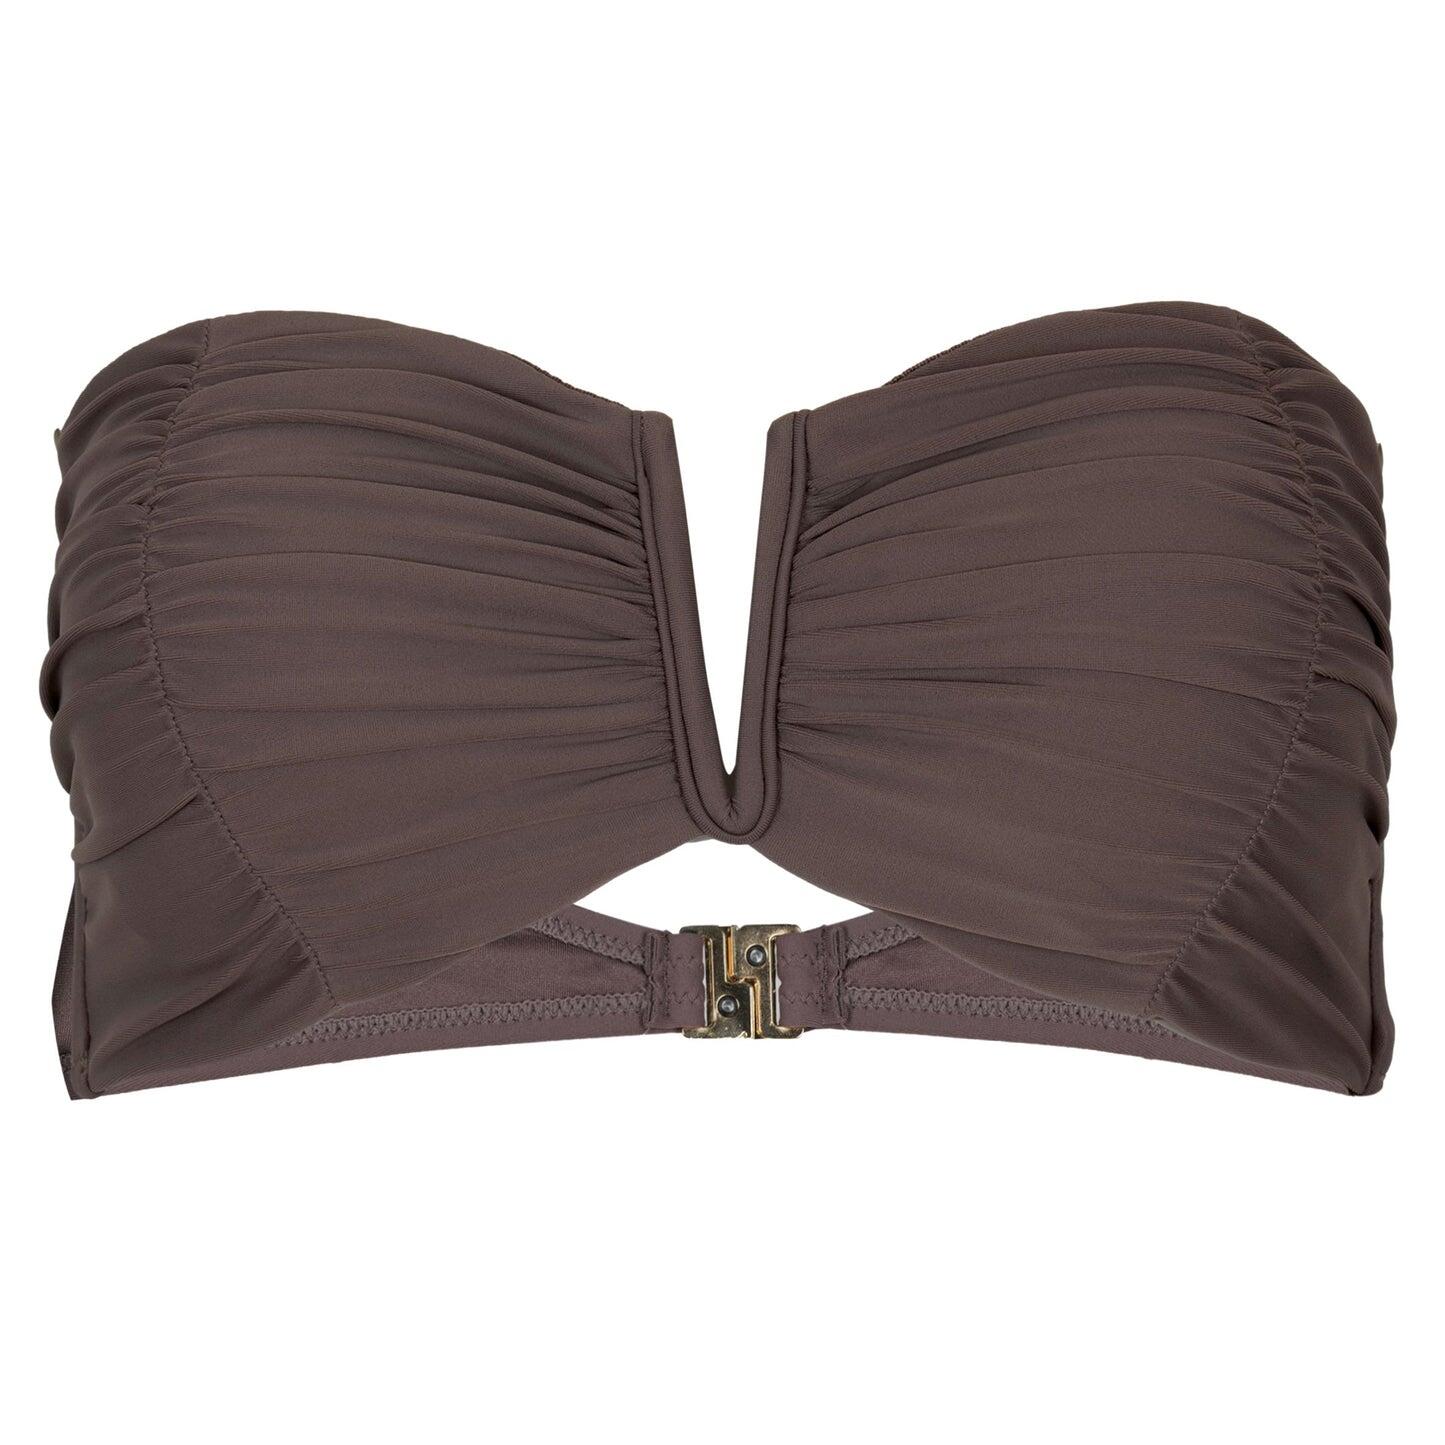 Aidy Rouched Bandeau Lanzarote Chocolate